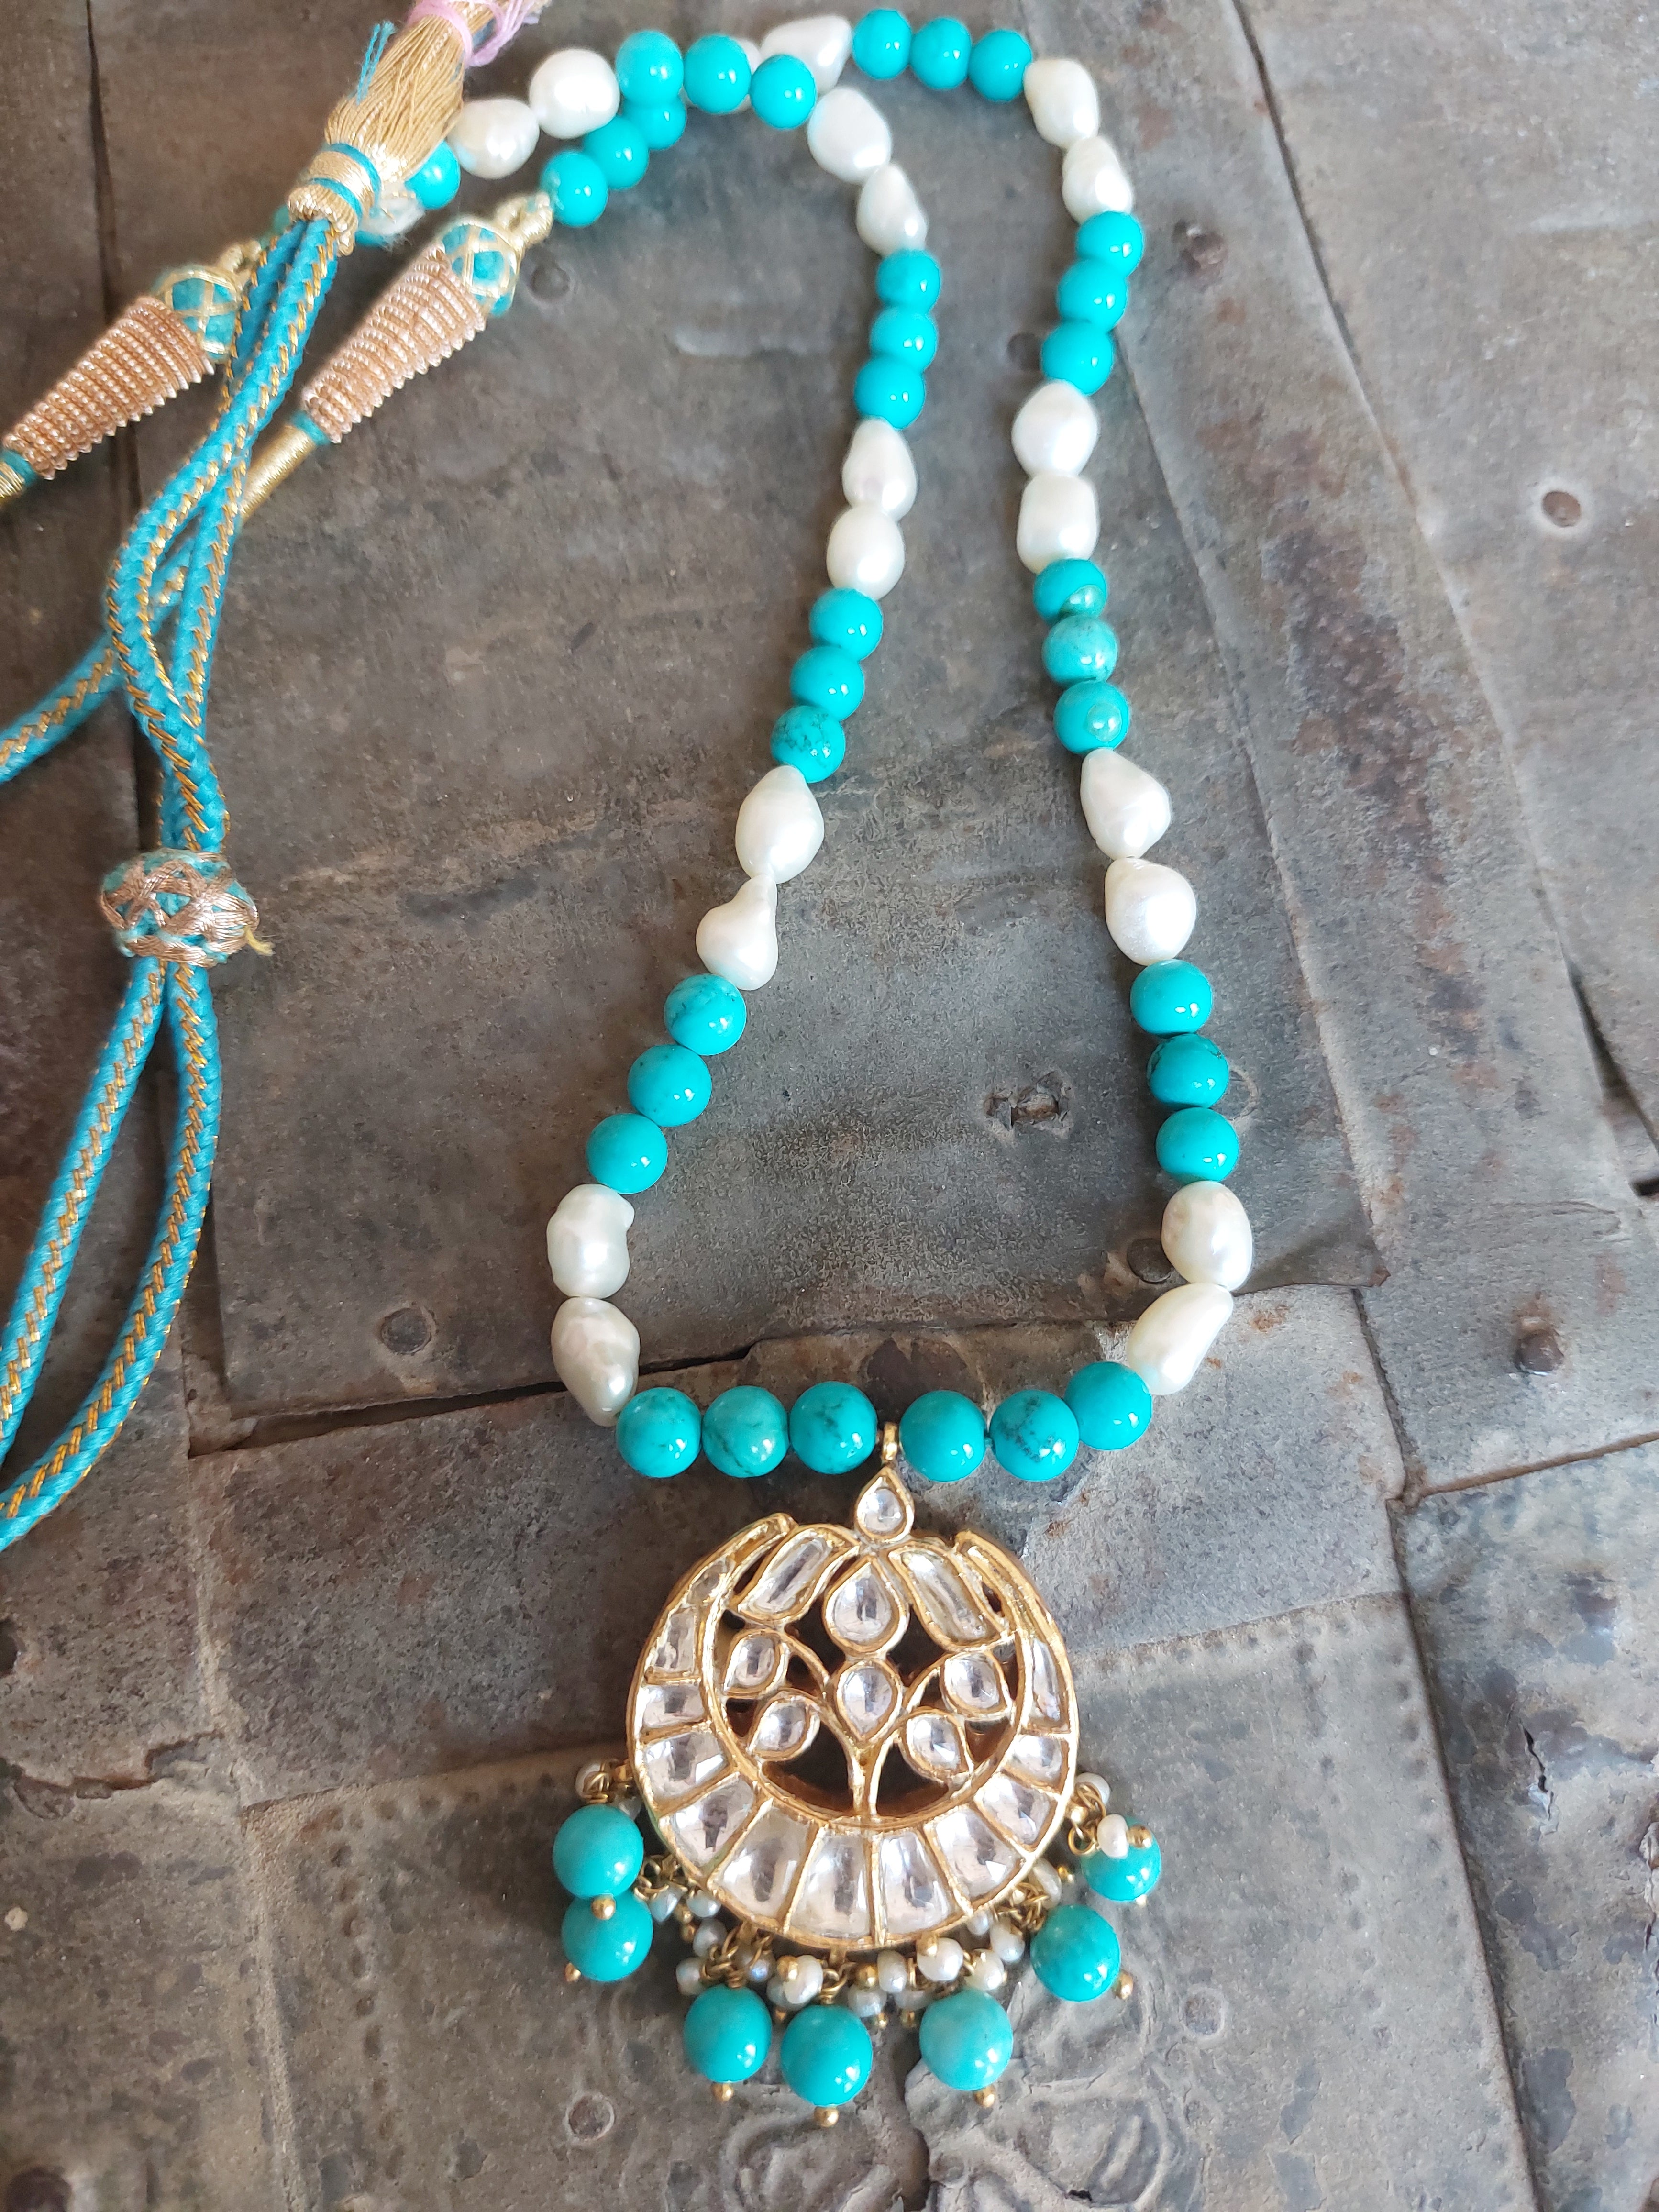 Chand with turquoise beads